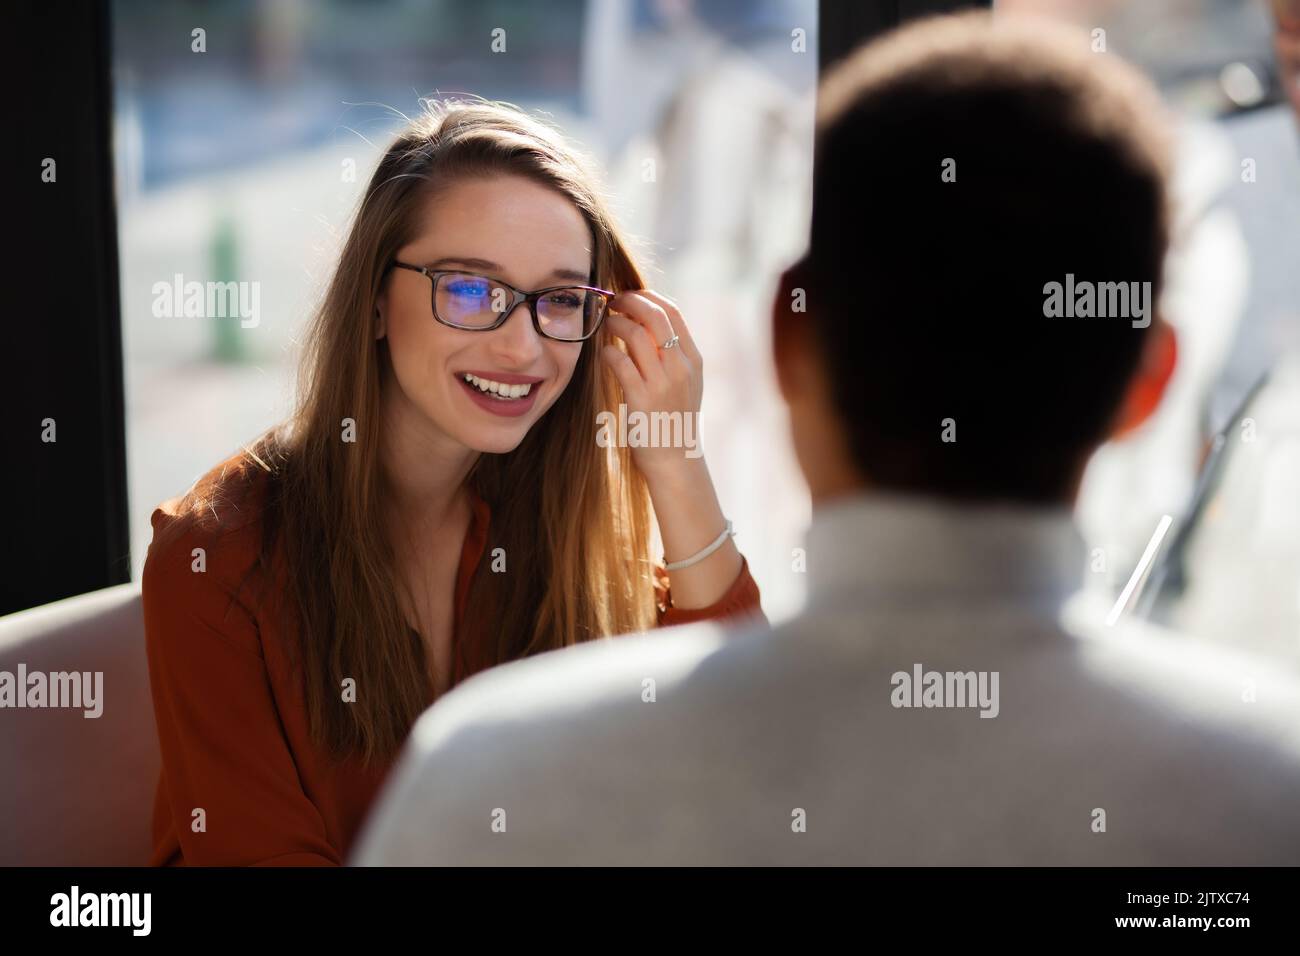 Friends in a restaurant talking smiling and drinking tea. Business colleagues having a meeting after work or during coffee break at a cafe bar. Stock Photo